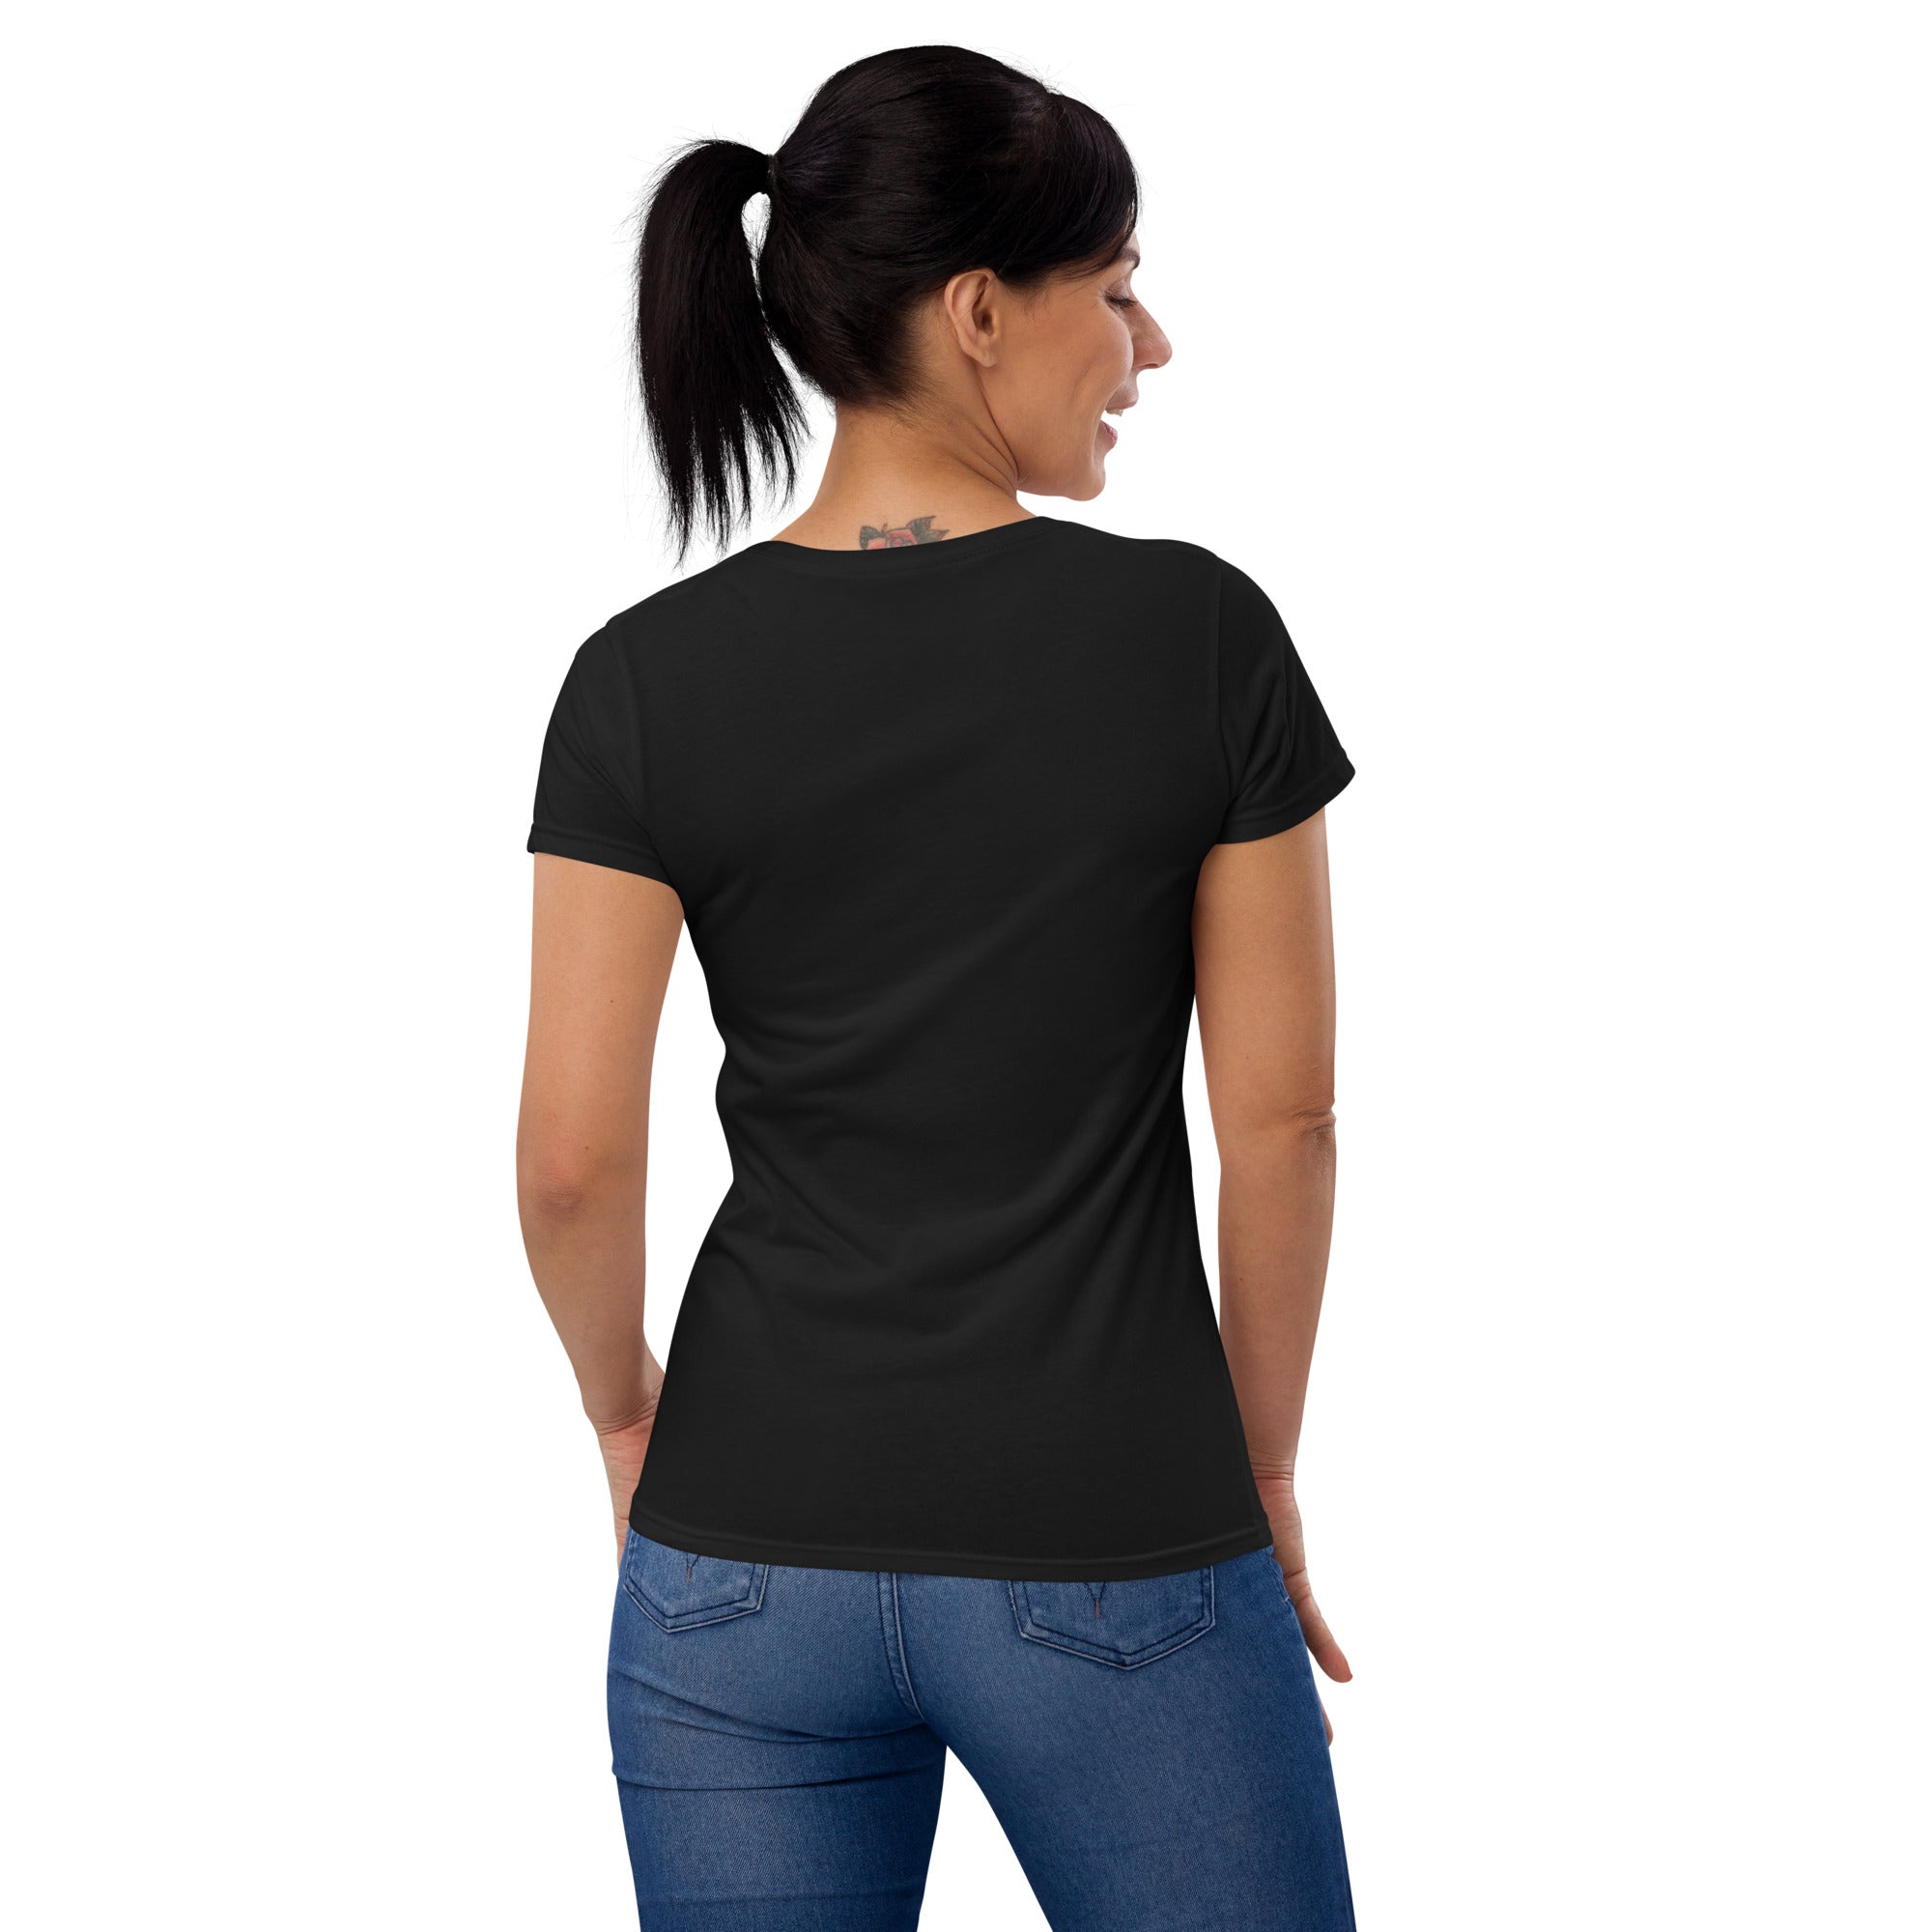 BE3 Embroidered Seal Women's short sleeve t-shirt